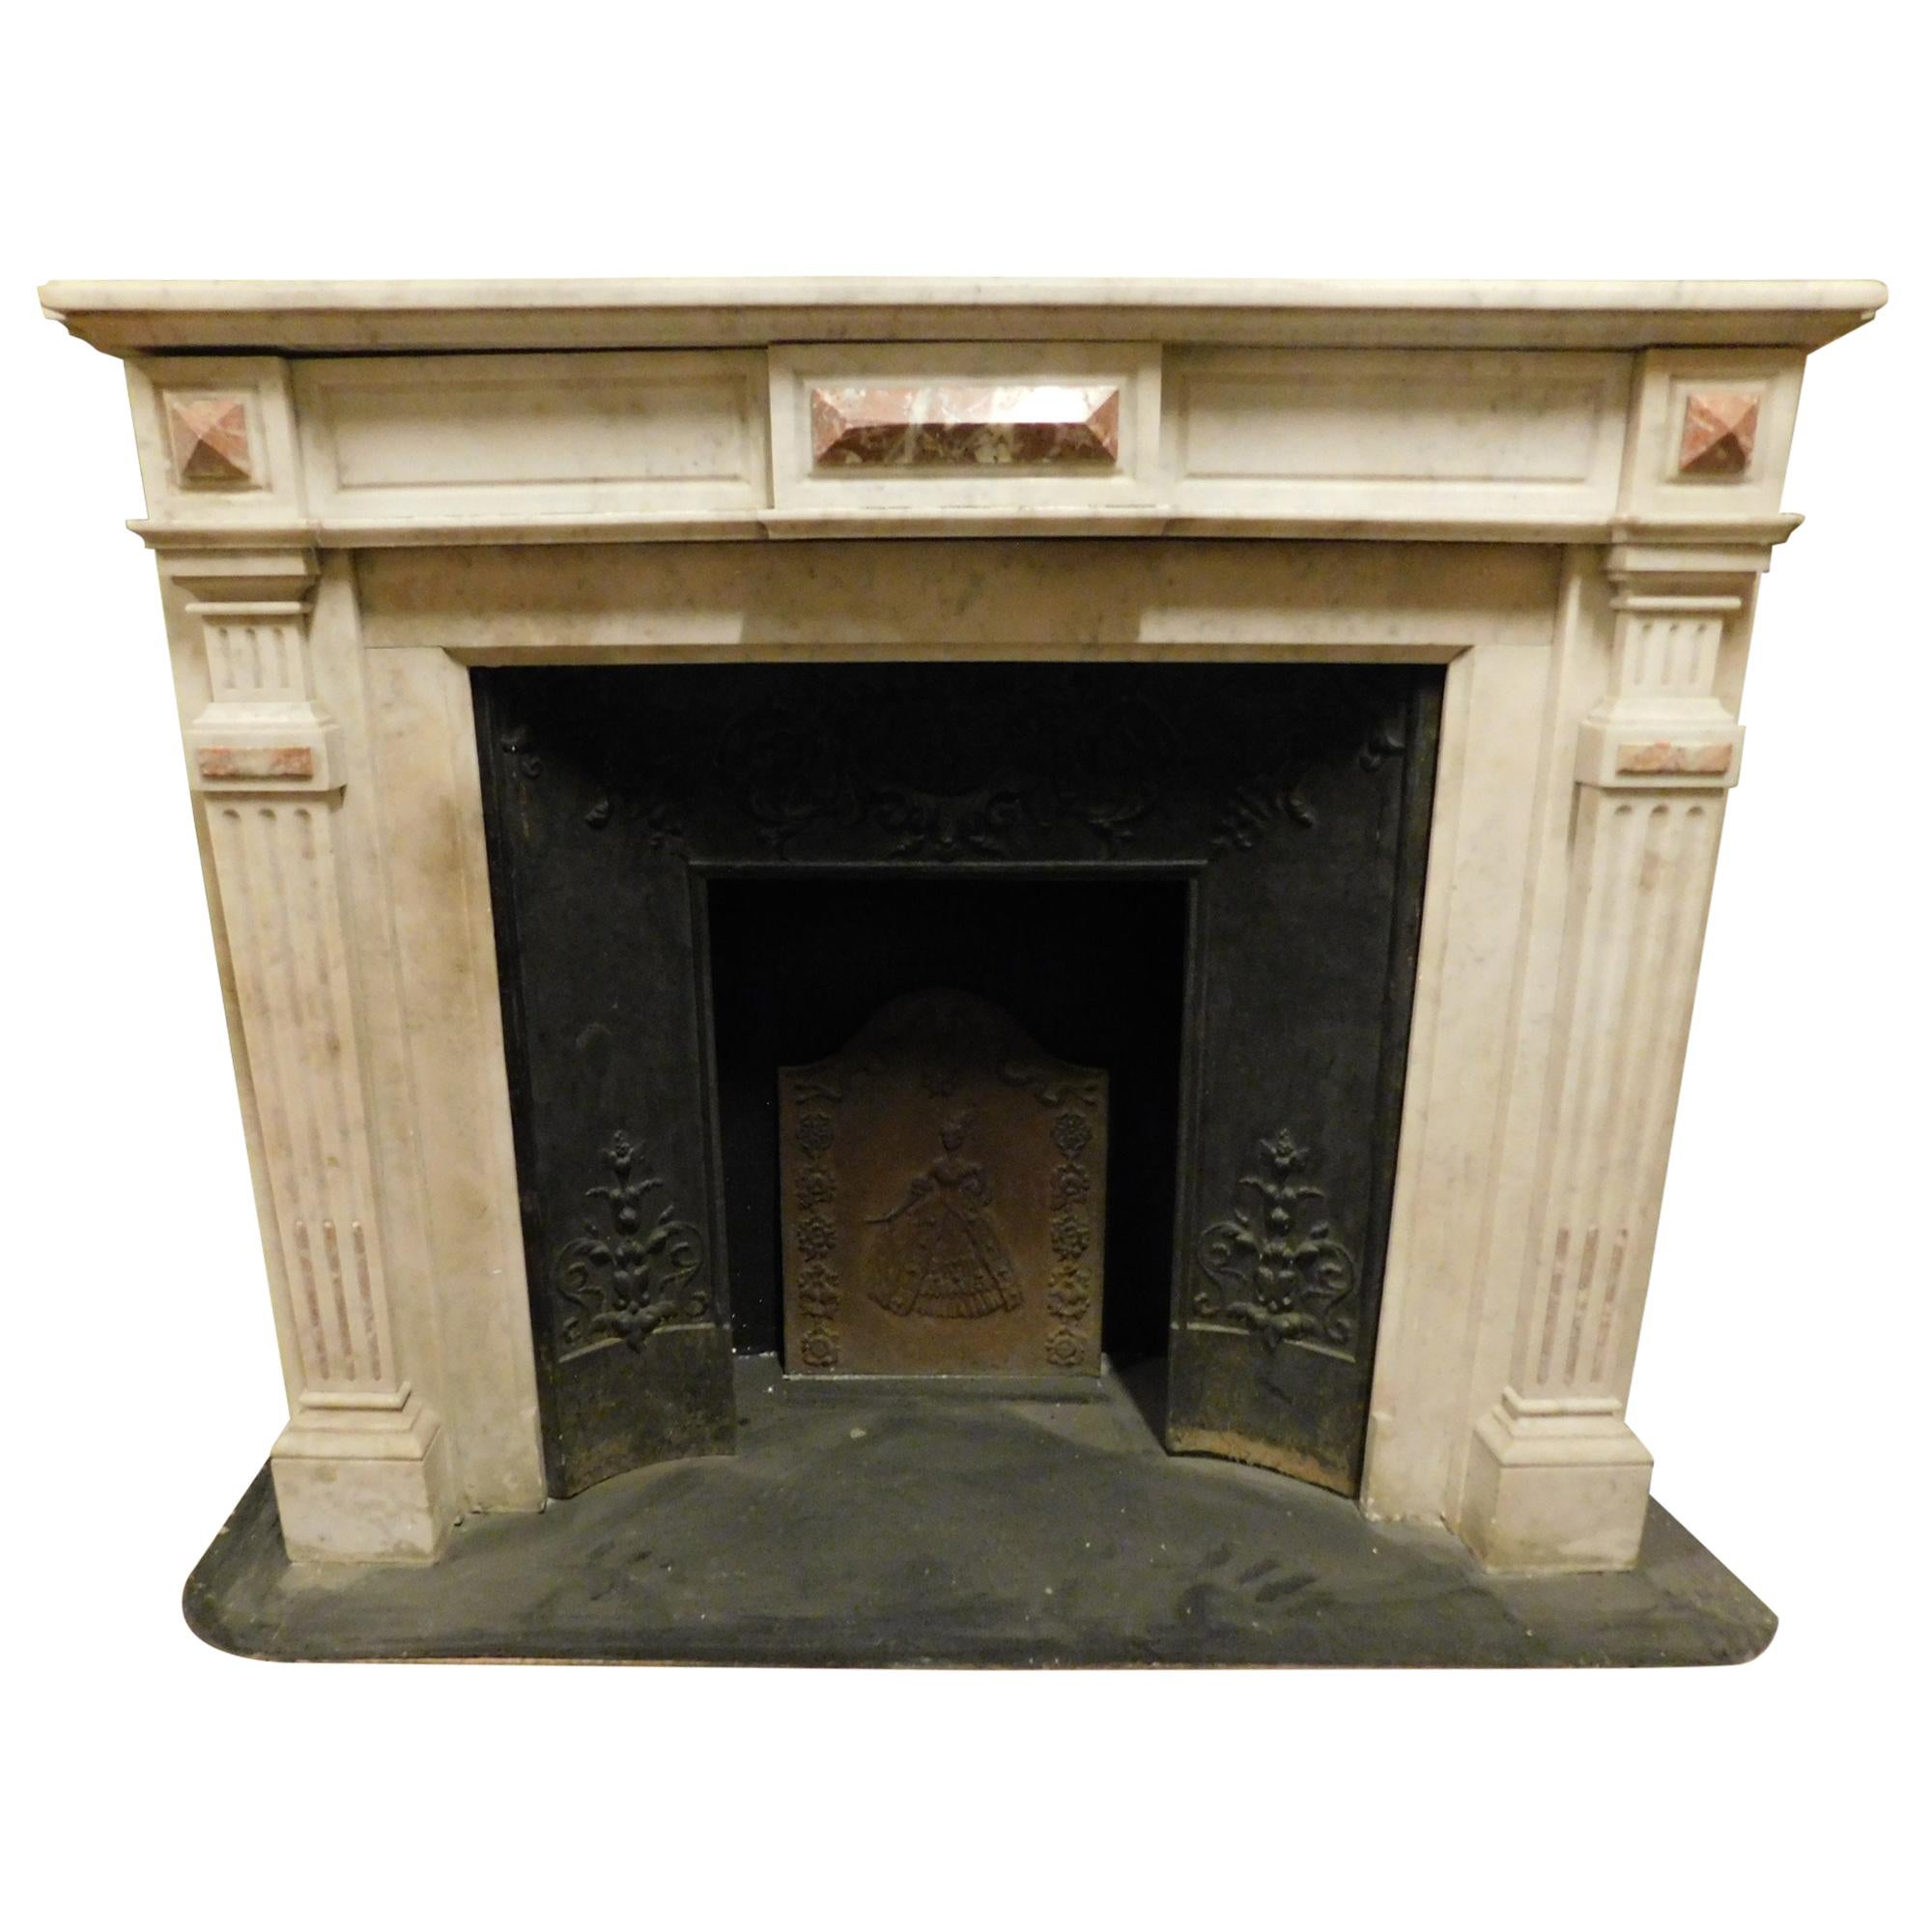 Antique Louis XVI Fireplace in White Marble with Pink Inlays, Early 1800 France